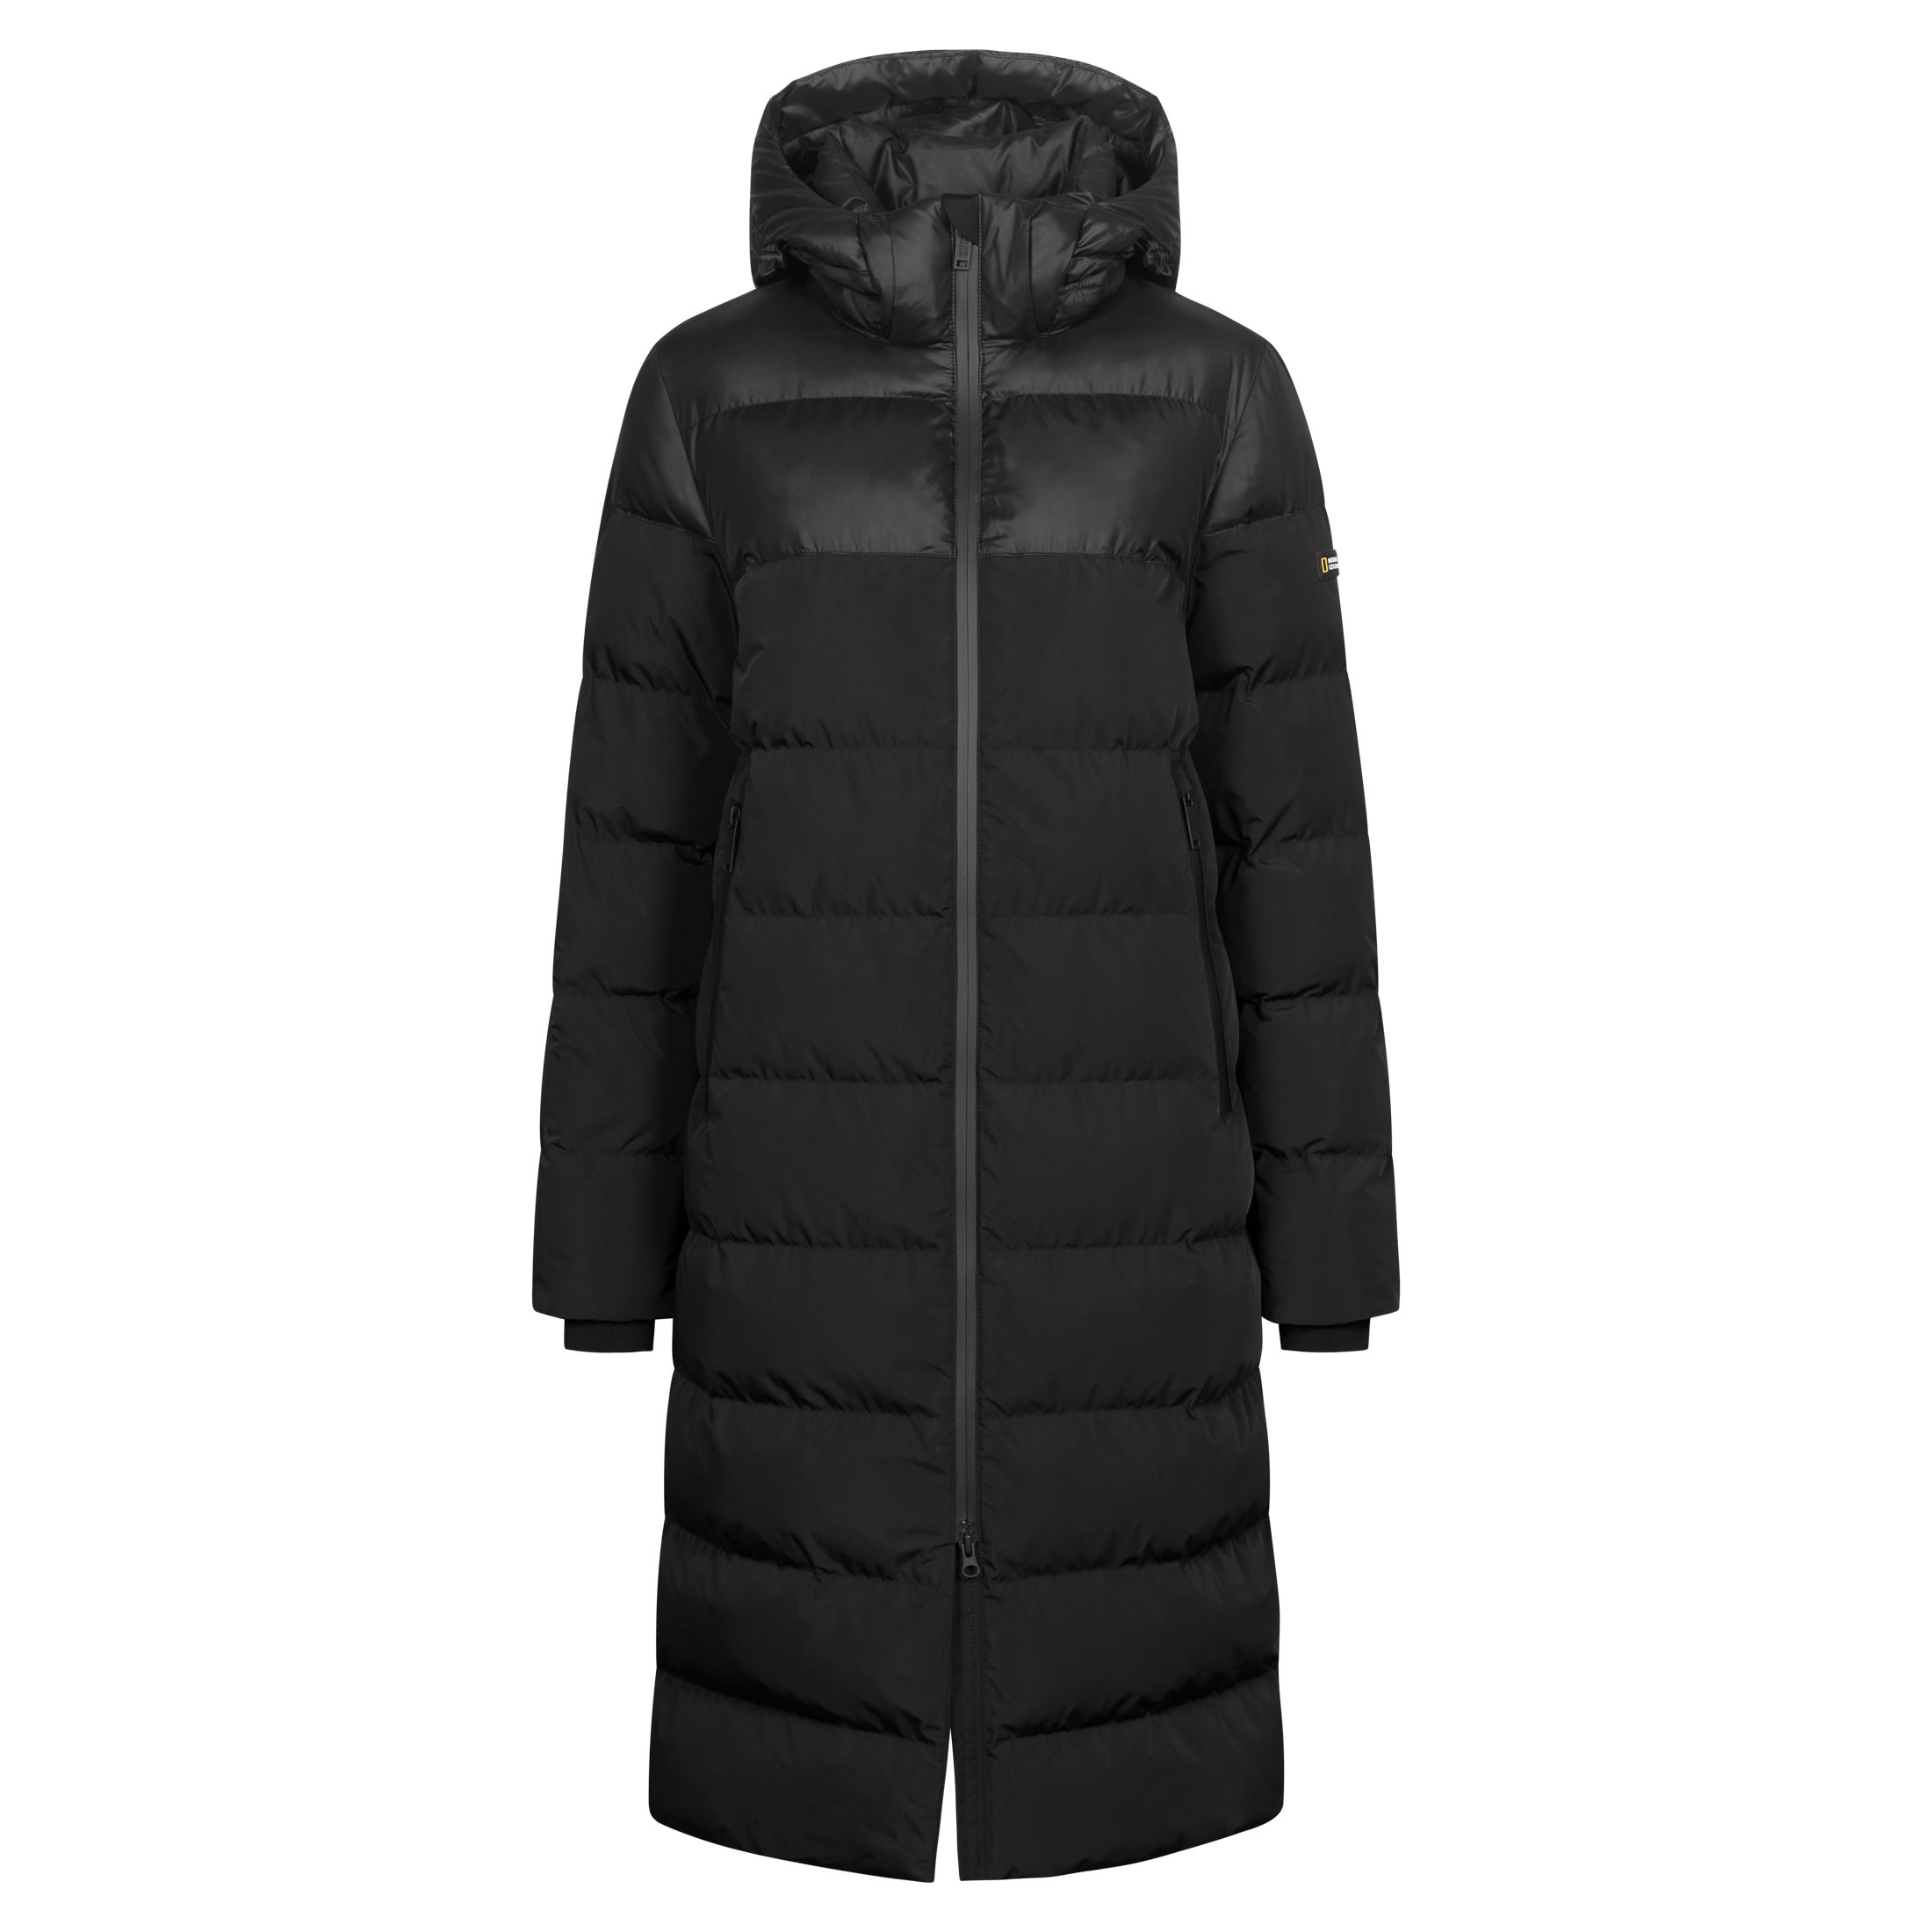 Köp National Geographic Women's Re Developed Coat hos Outnorth